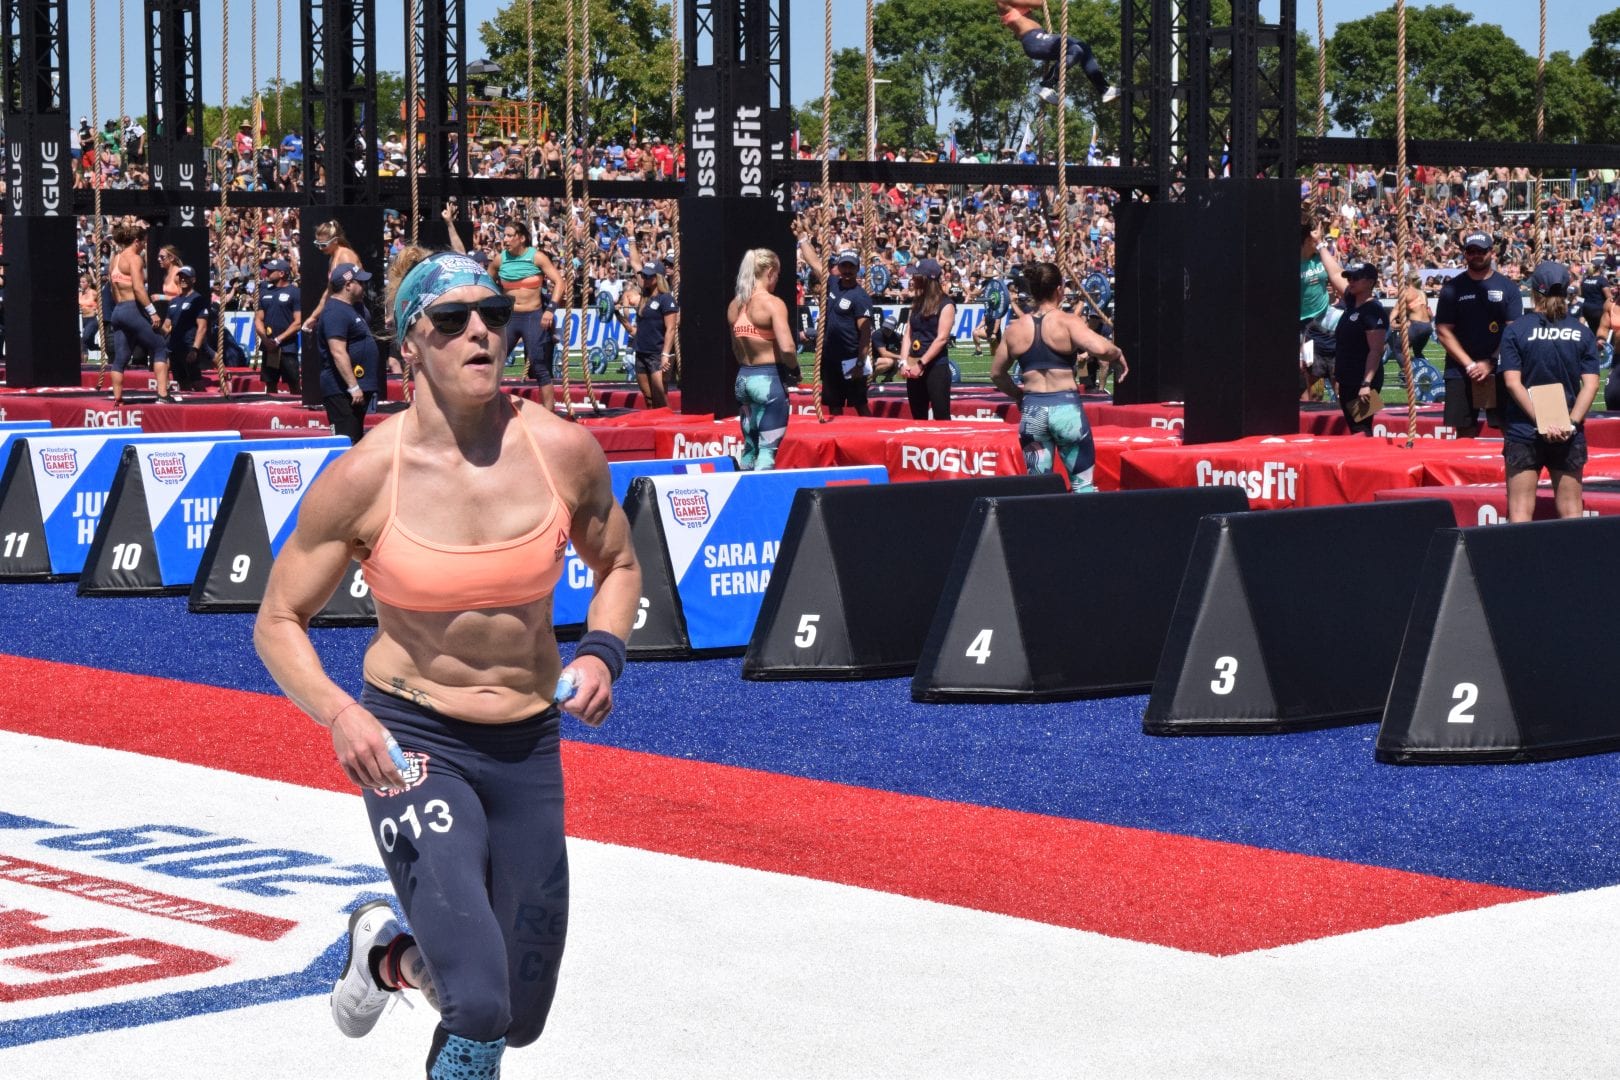 Sam Briggs runs before her legless rope climbs at the 2019 CrossFit Games